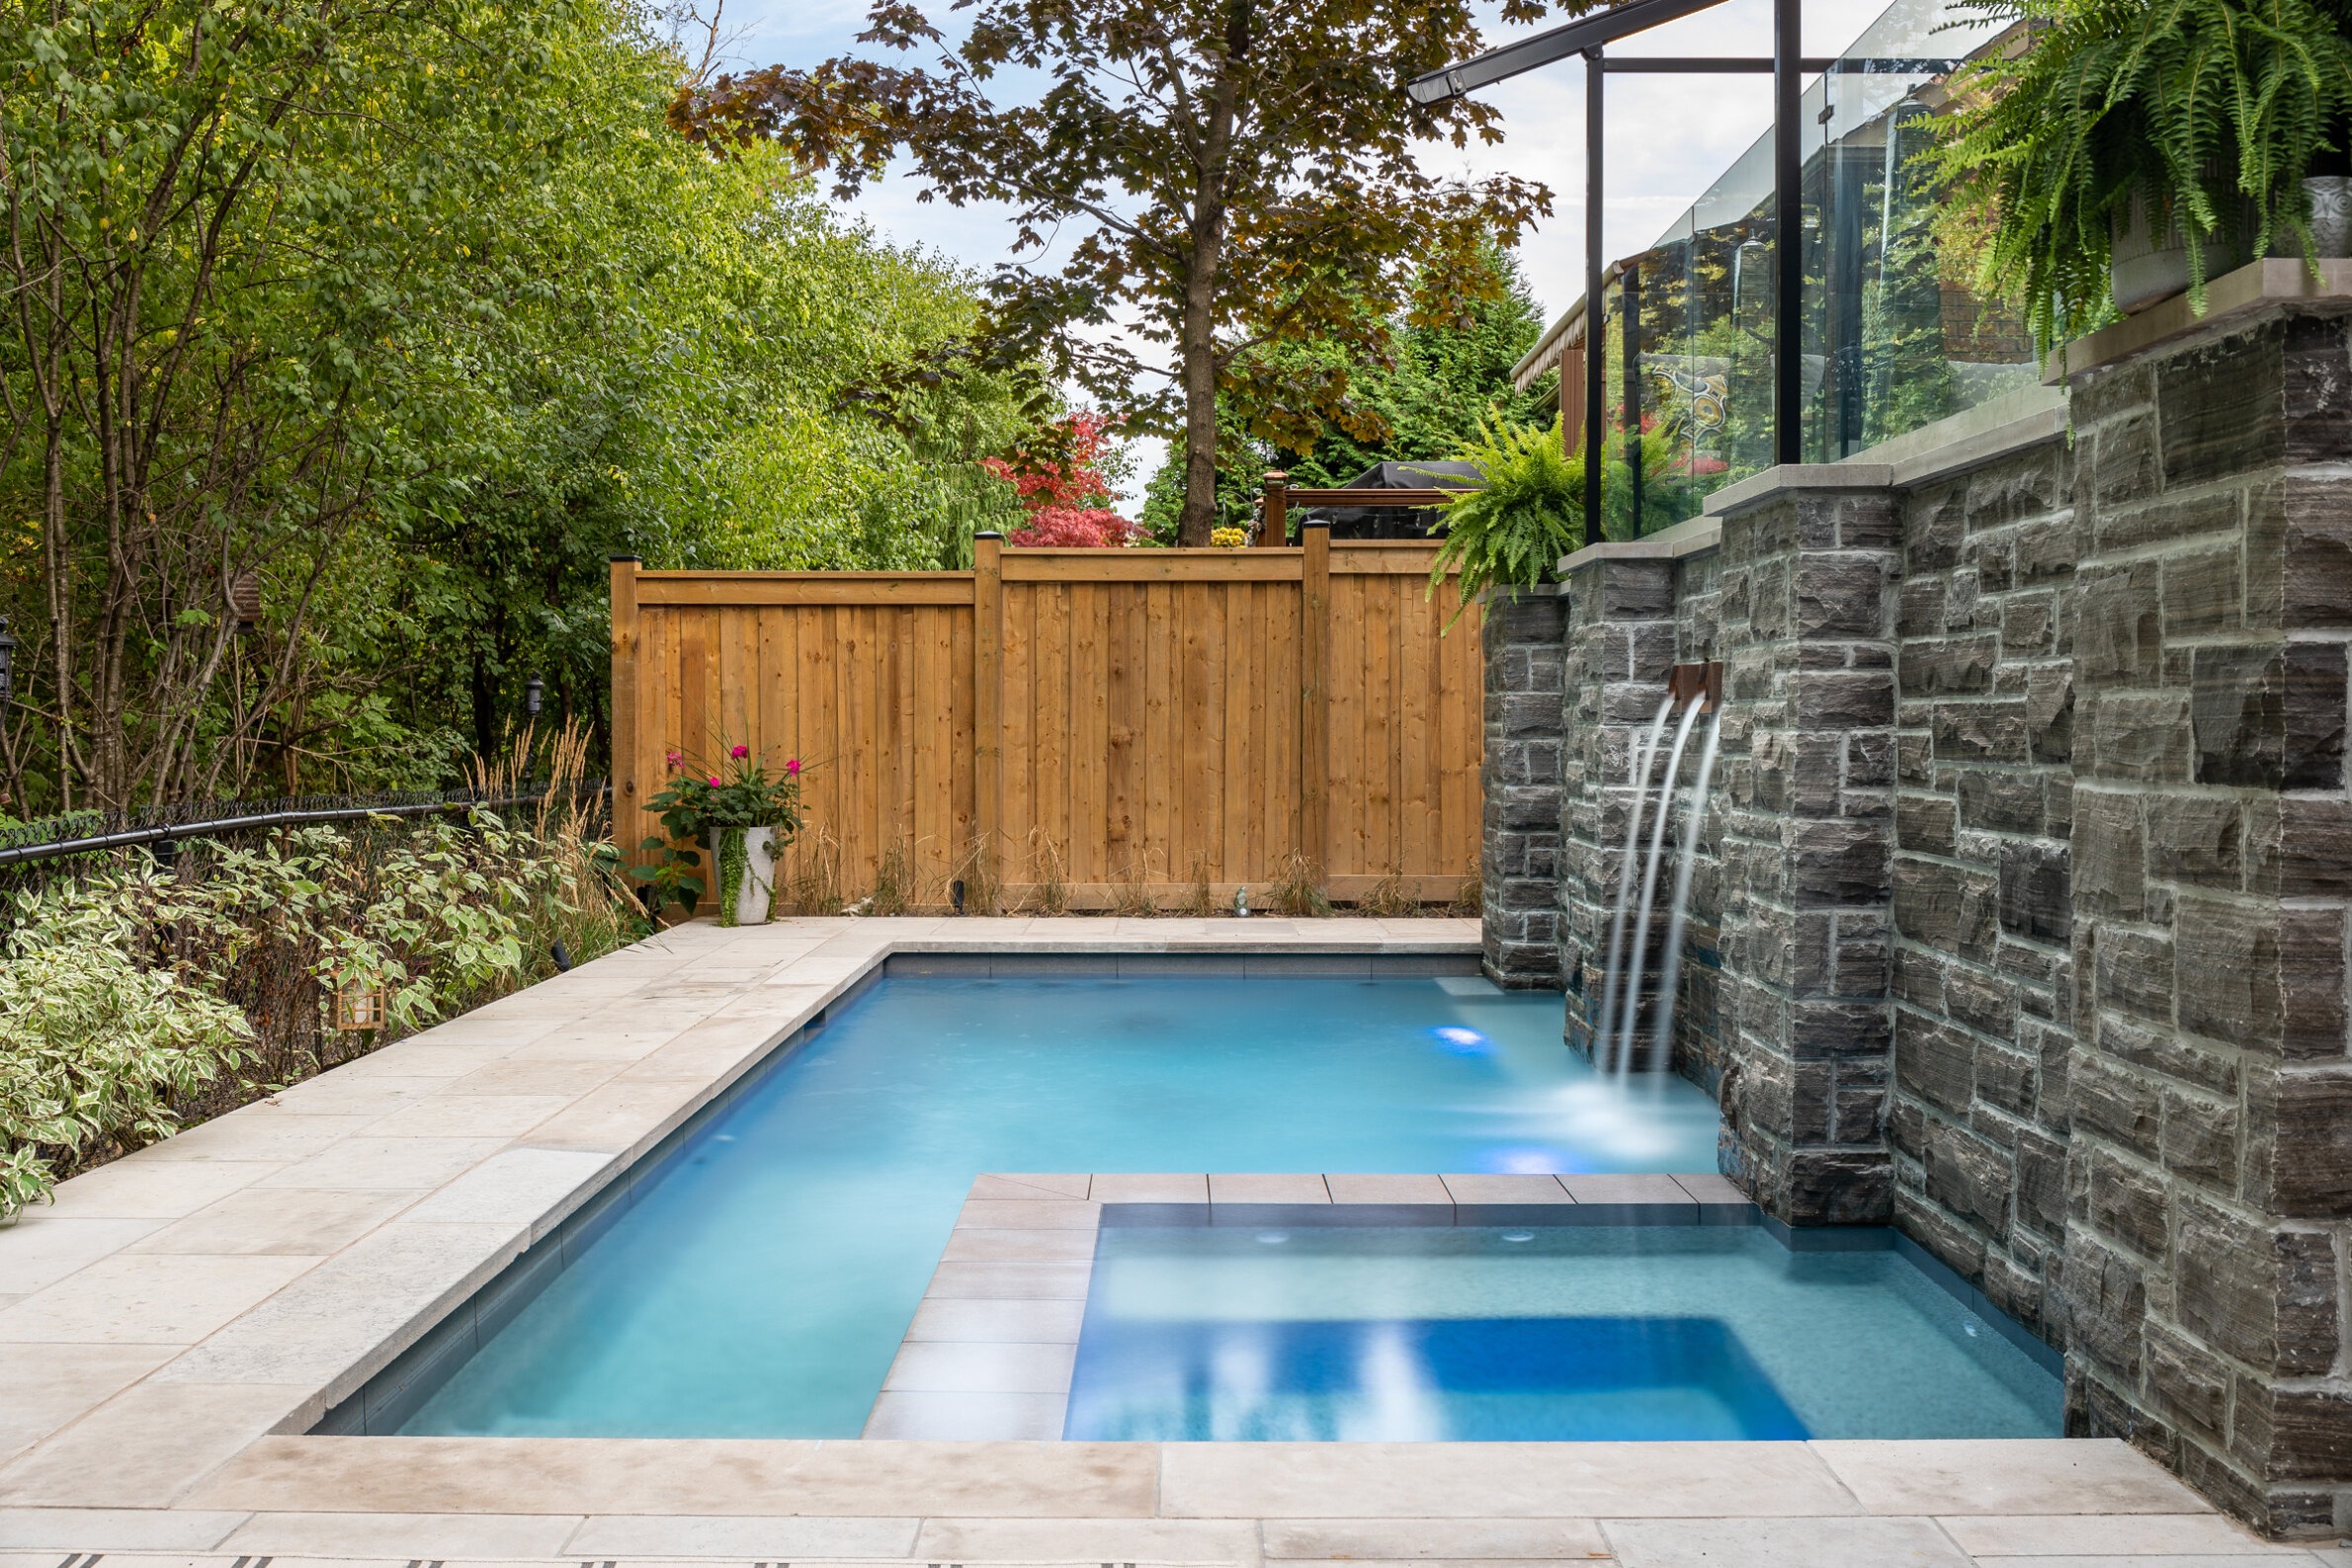 This image features an outdoor swimming pool with a stone waterfall, surrounded by a wooden fence, landscaping, and a glass-paneled canopy structure.